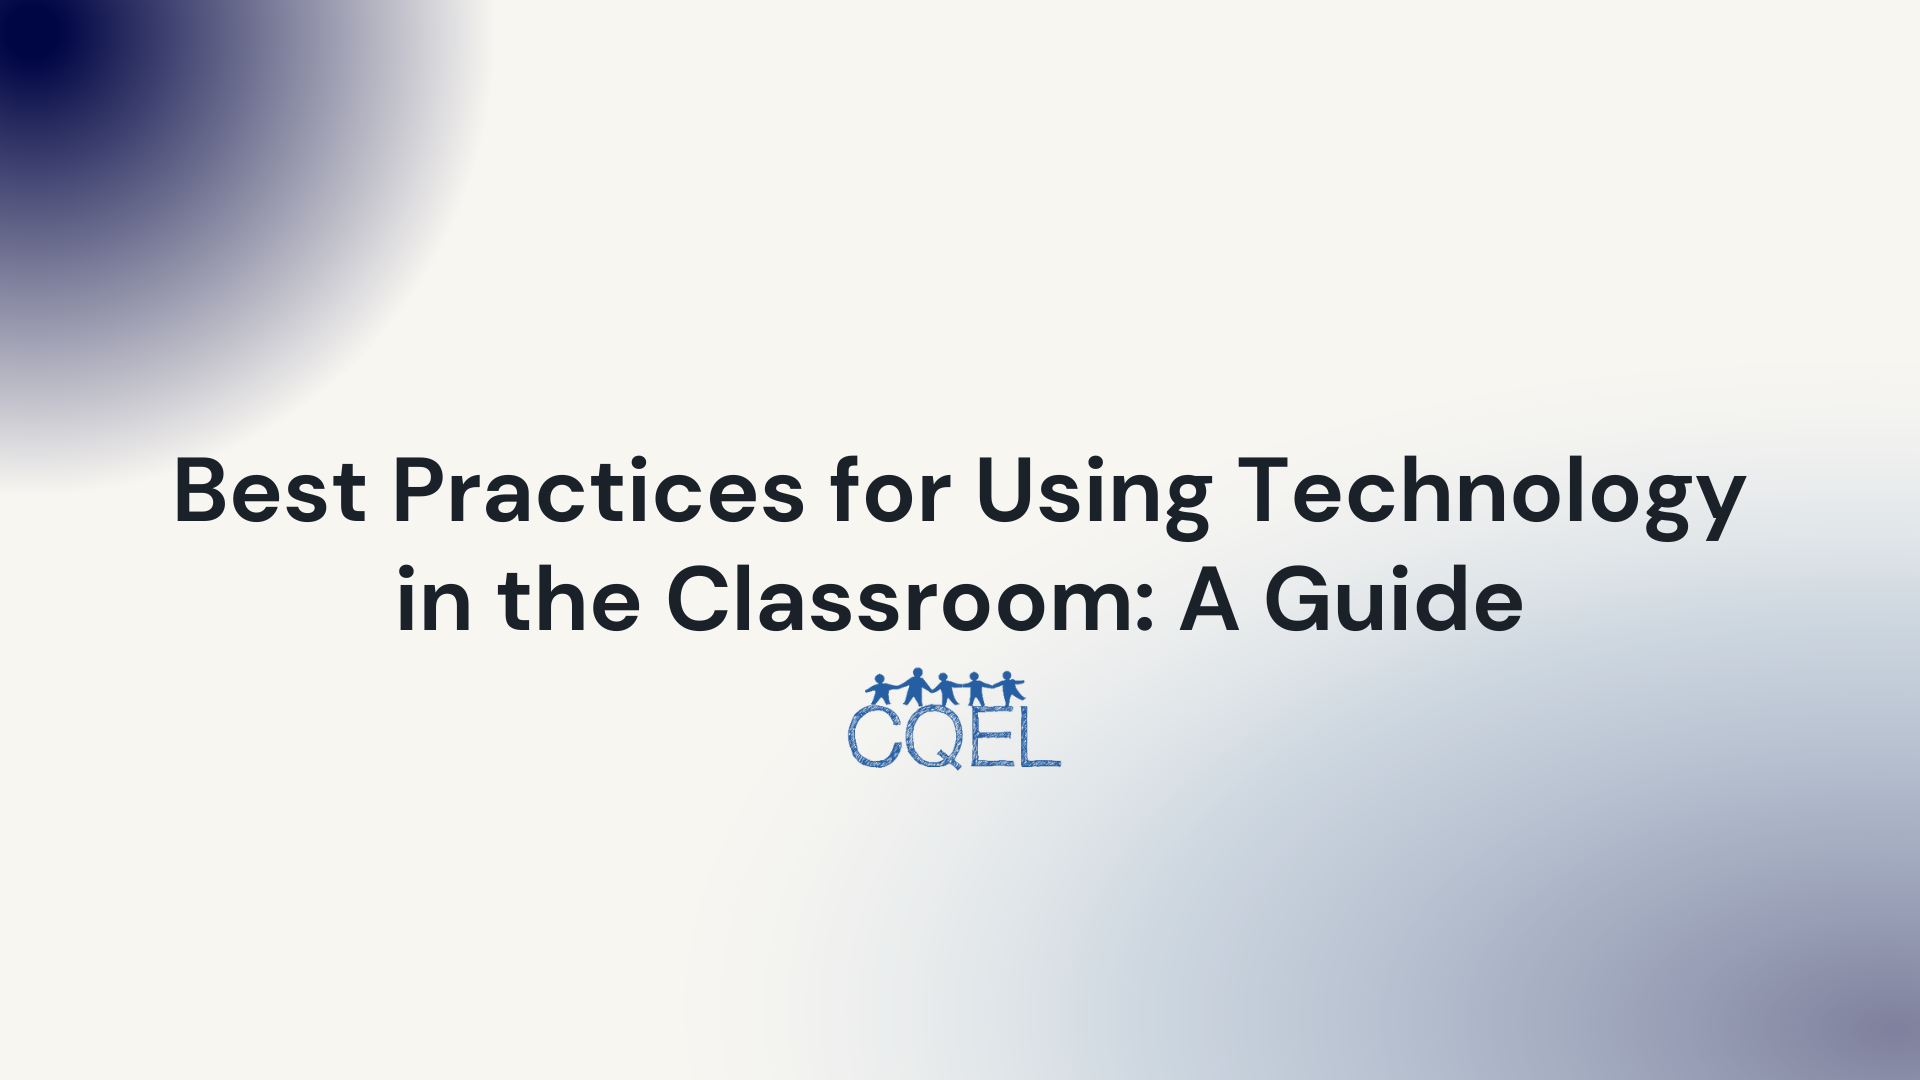 Best Practices for Using Technology in the Classroom: A Guide